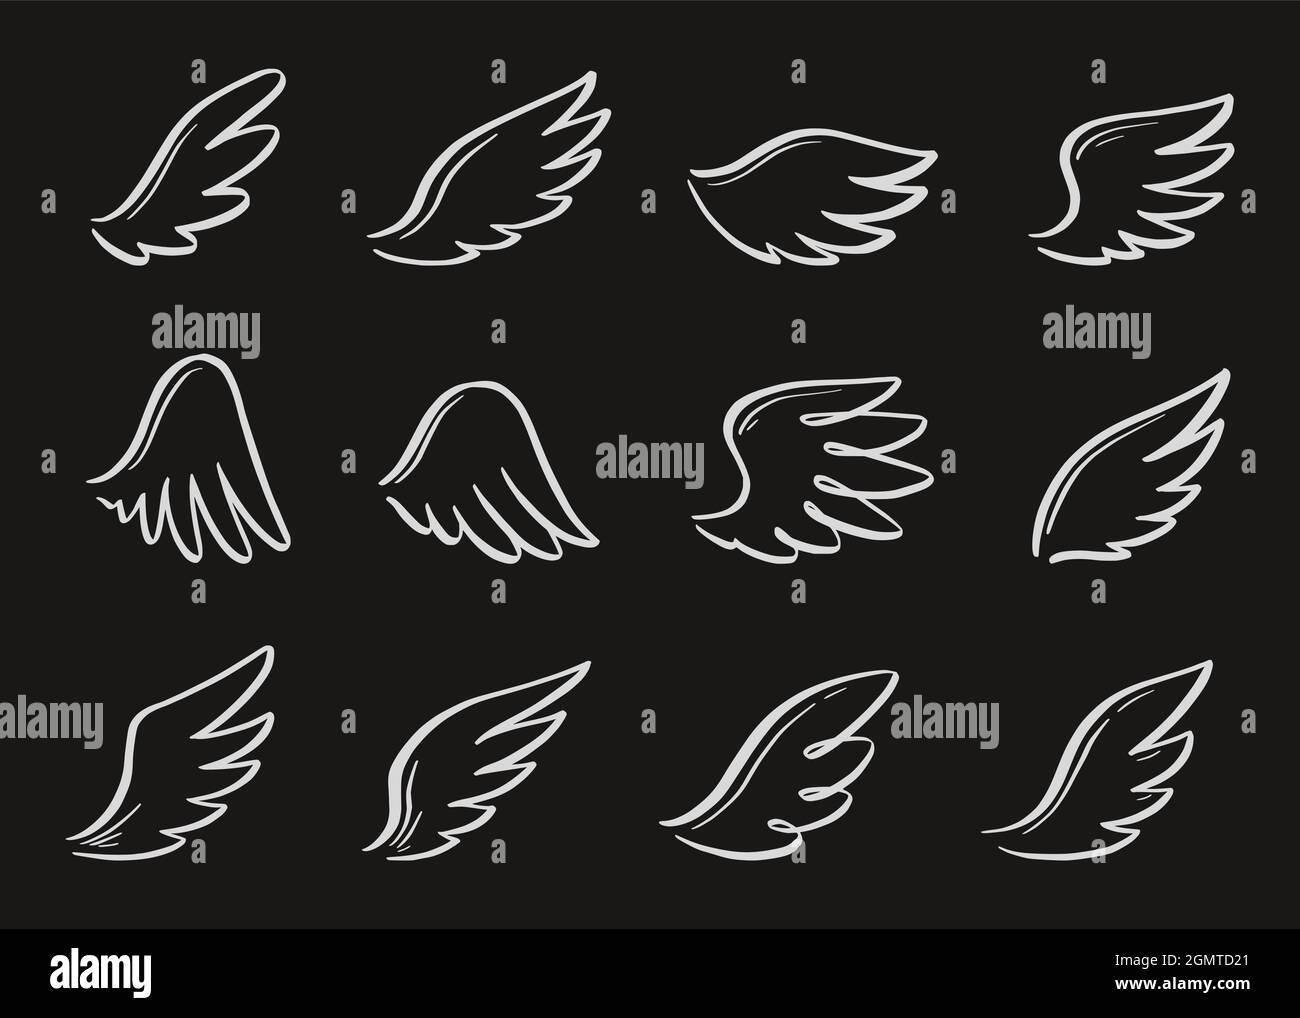 https://c8.alamy.com/comp/2GMTD21/angel-doodle-wing-set-on-chalkboard-hand-drawn-sketch-style-wing-bird-feather-angel-concept-vector-illustration-pencil-line-drawing-2GMTD21.jpg